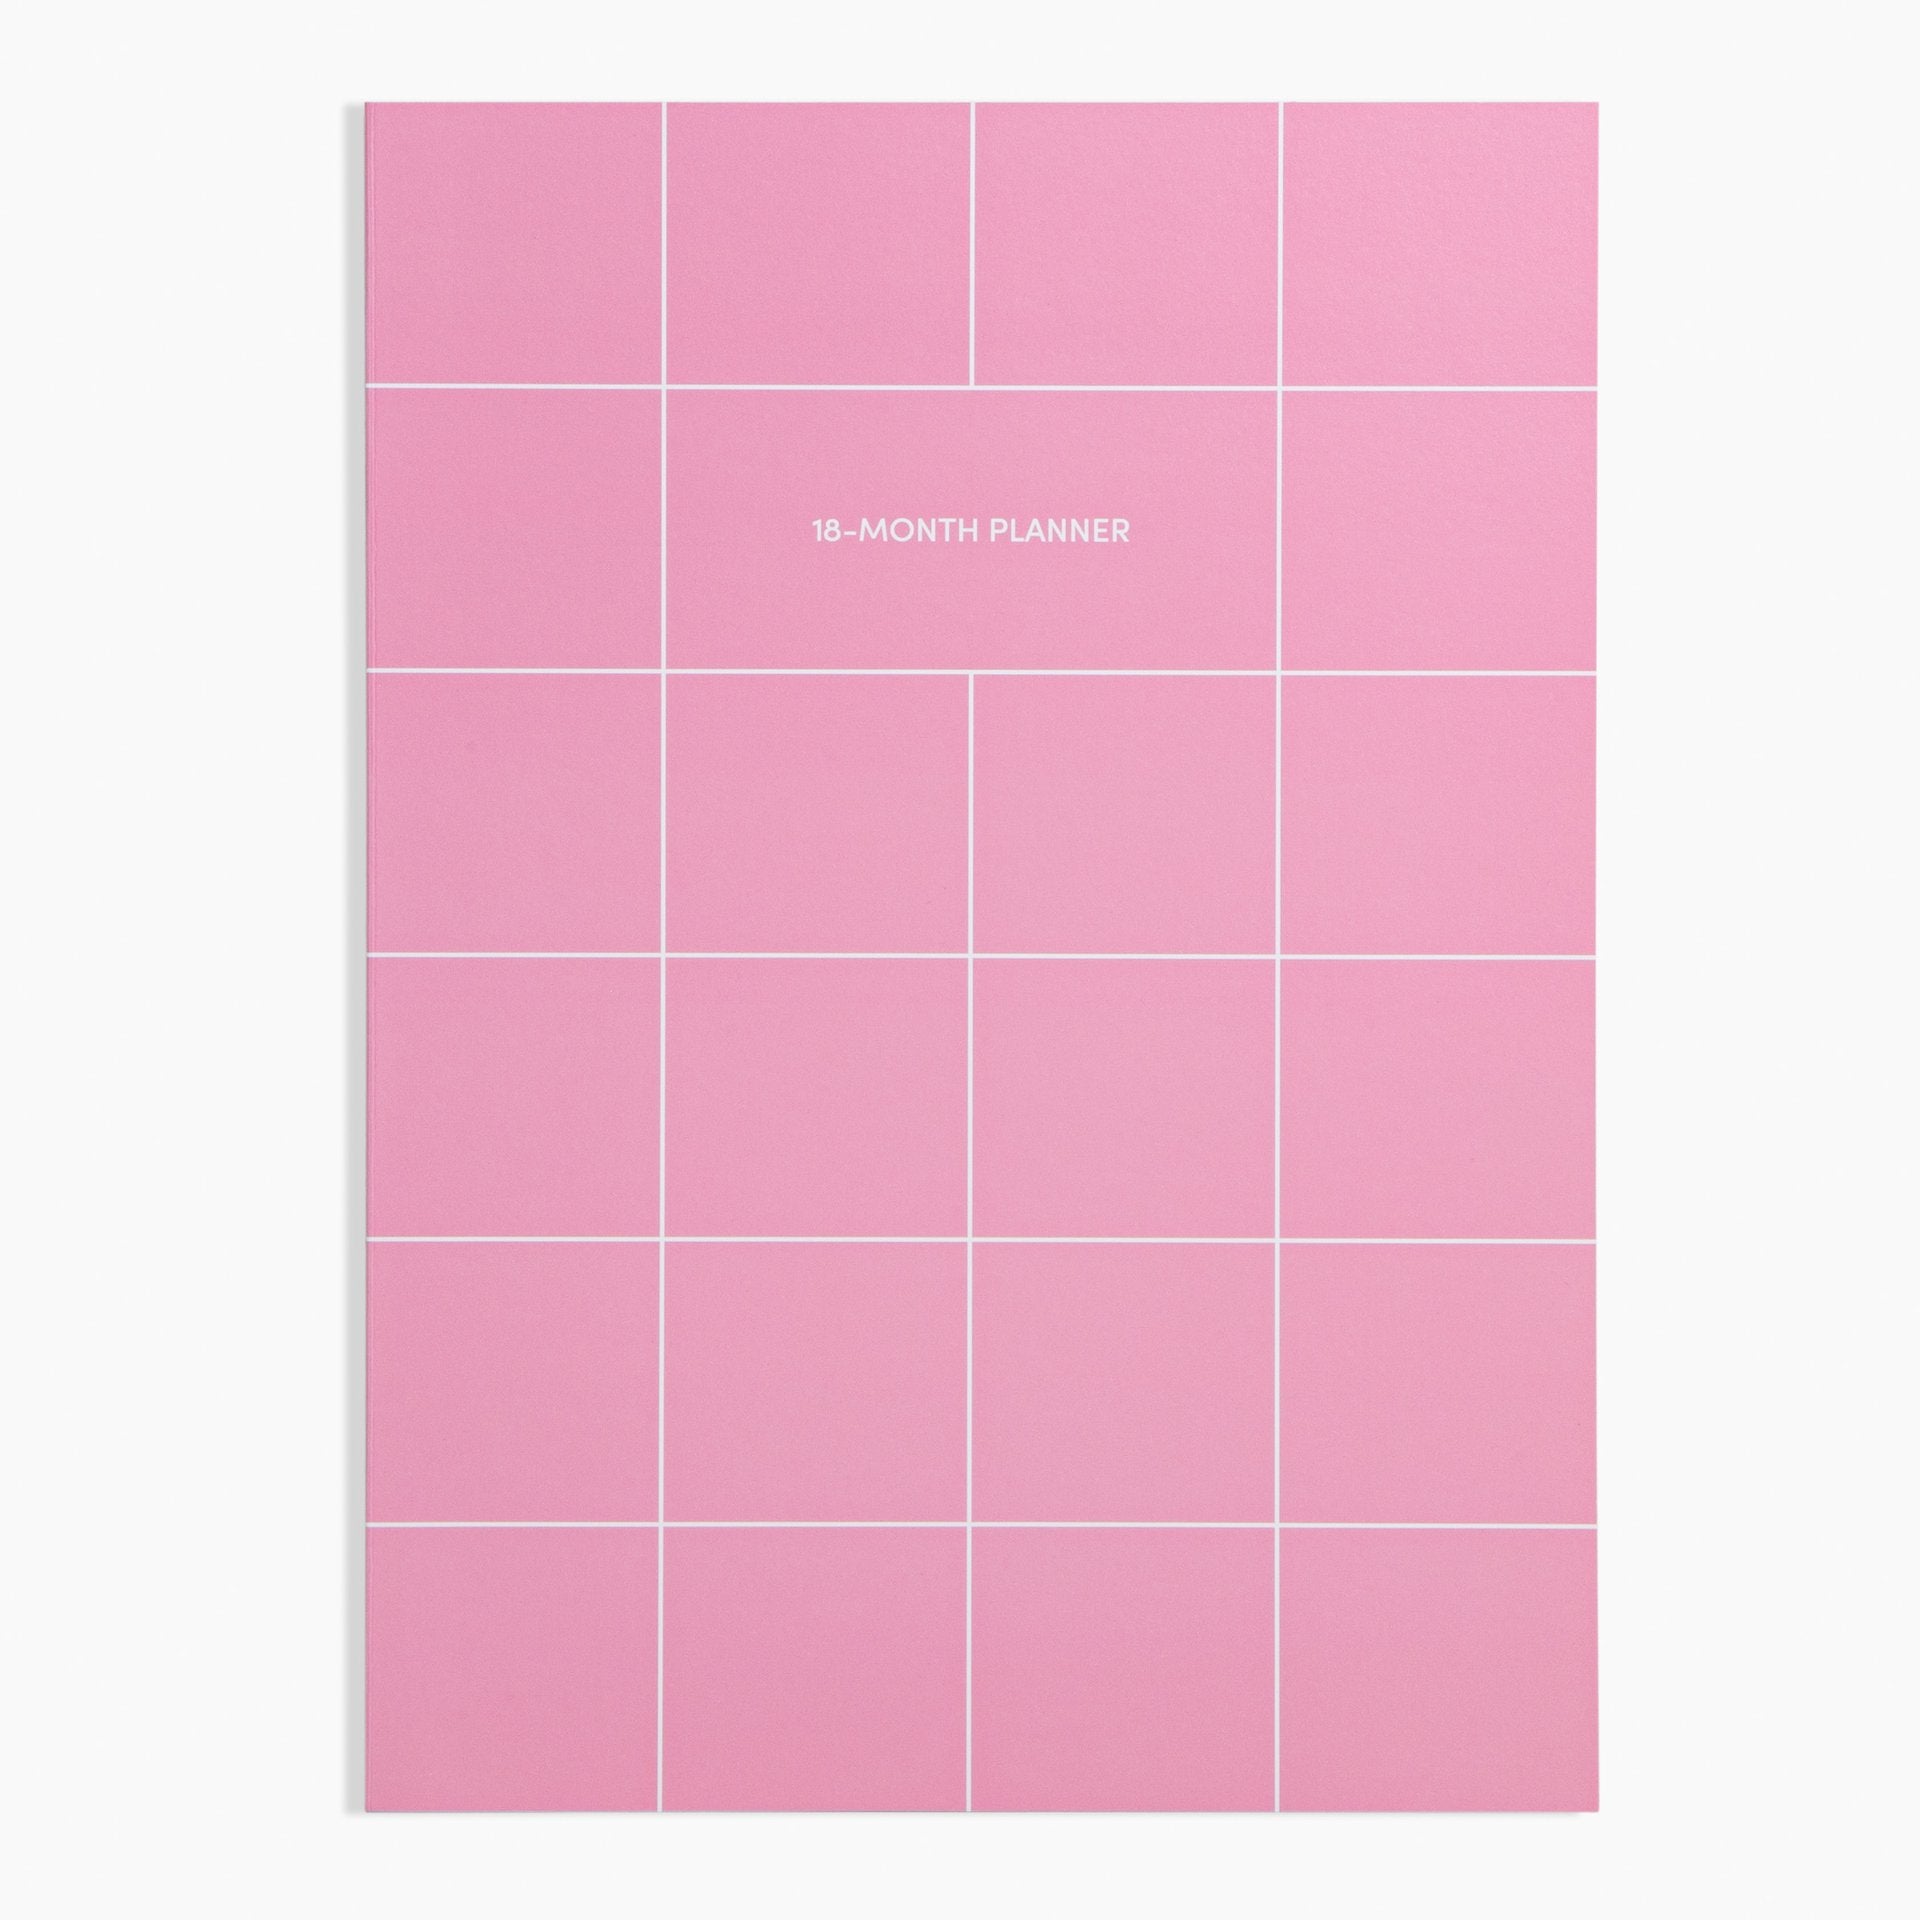 Poketo 18-Month Planner in Pink